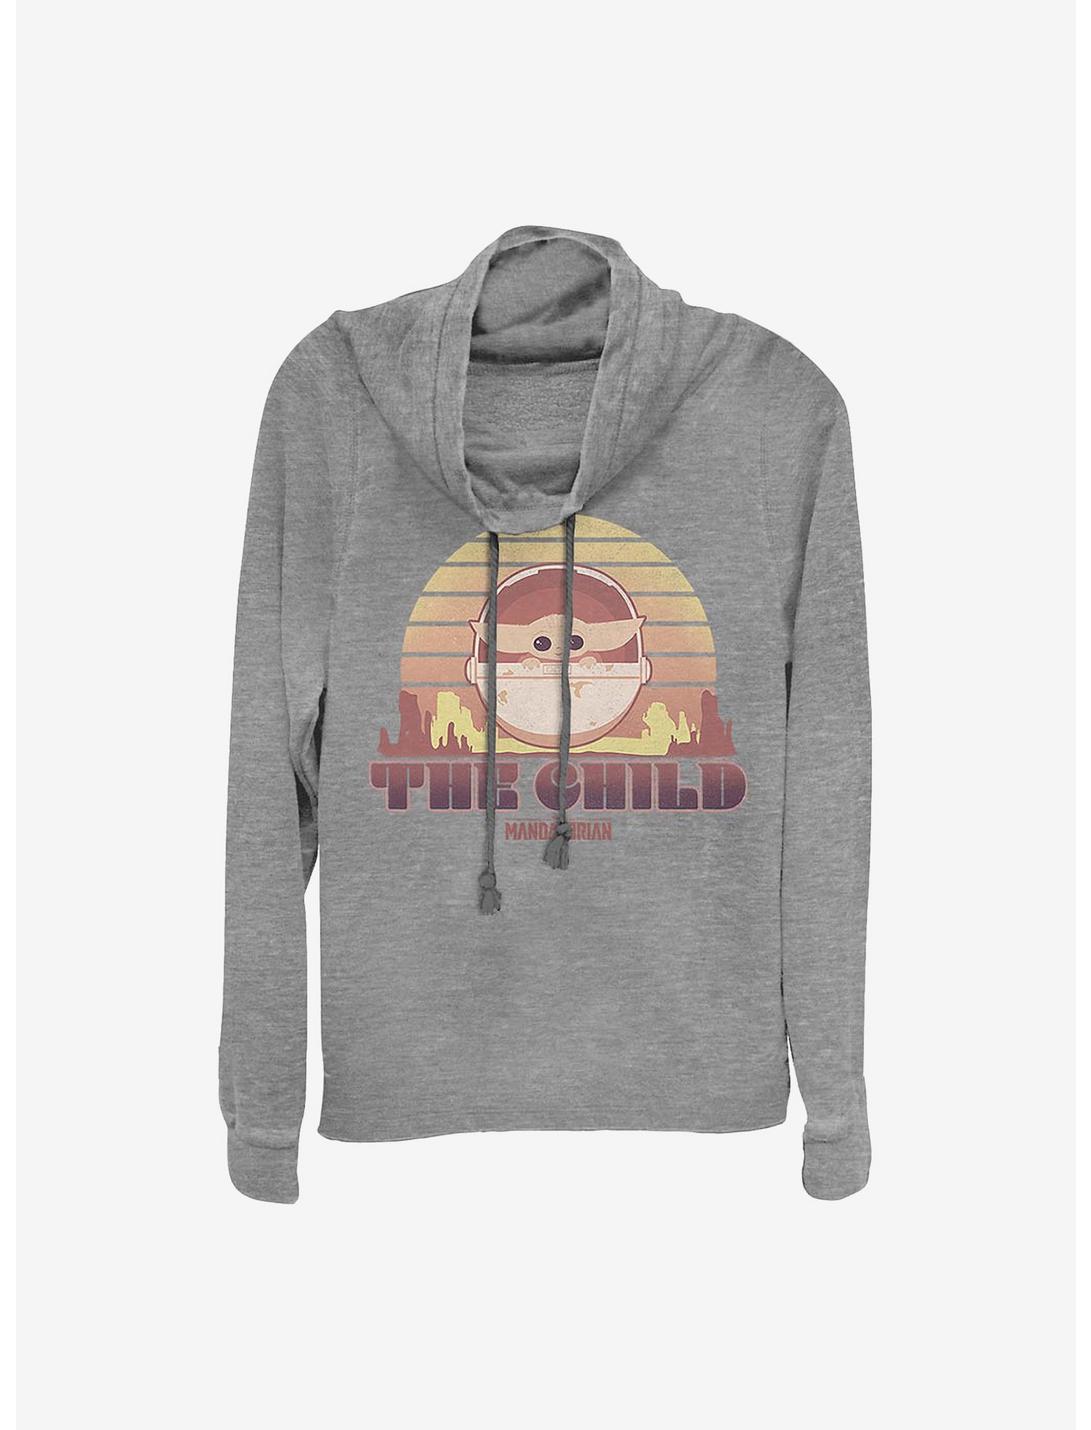 Star Wars The Mandalorian Sunset The Child Cowlneck Long-Sleeve Girls Top, GRAY HTR, hi-res